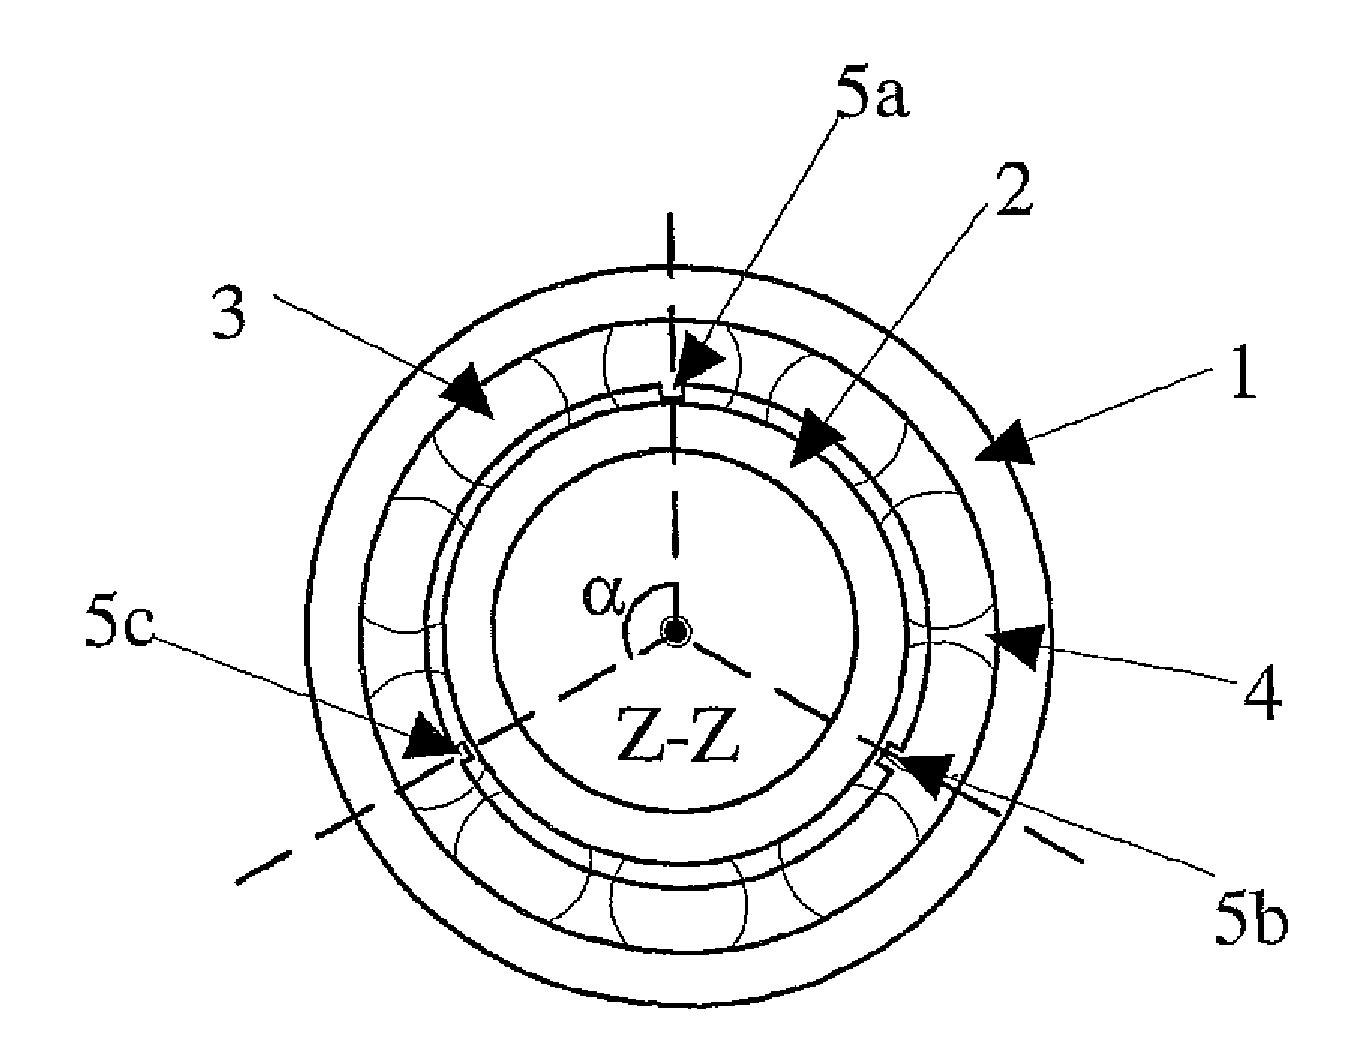 Device and method for monitoring the vibratory condition of a rotating machine